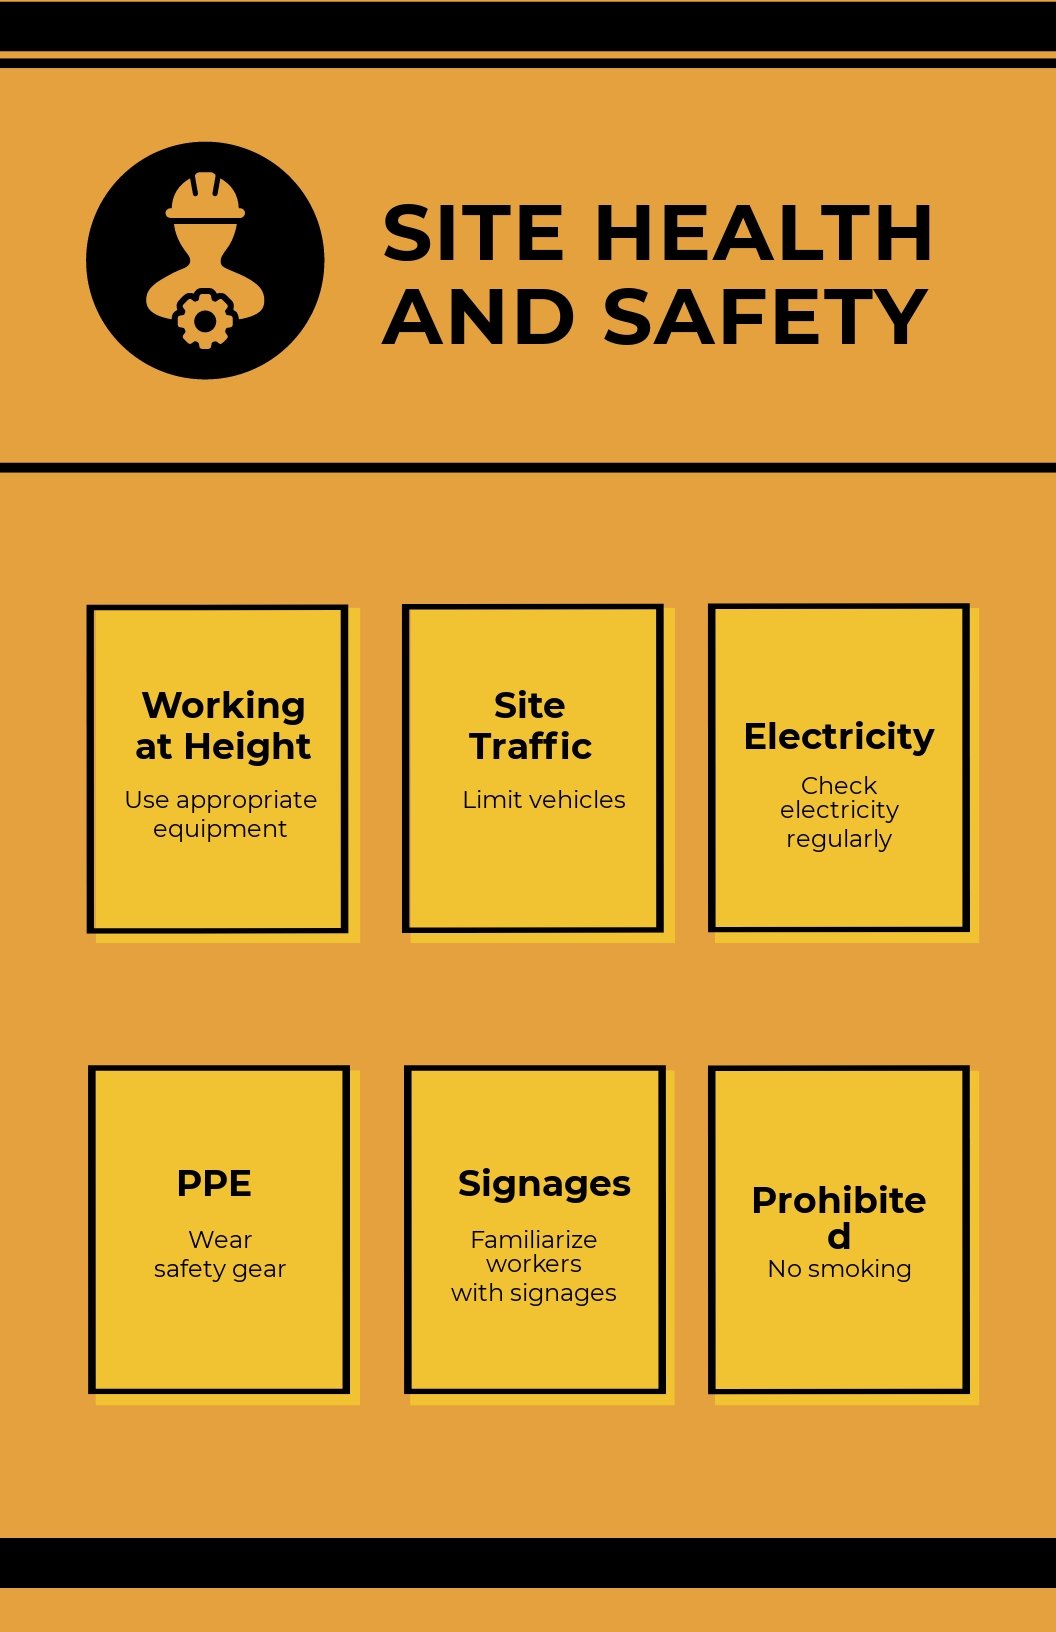 Construction Site Health and Safety Poster Template.jpe